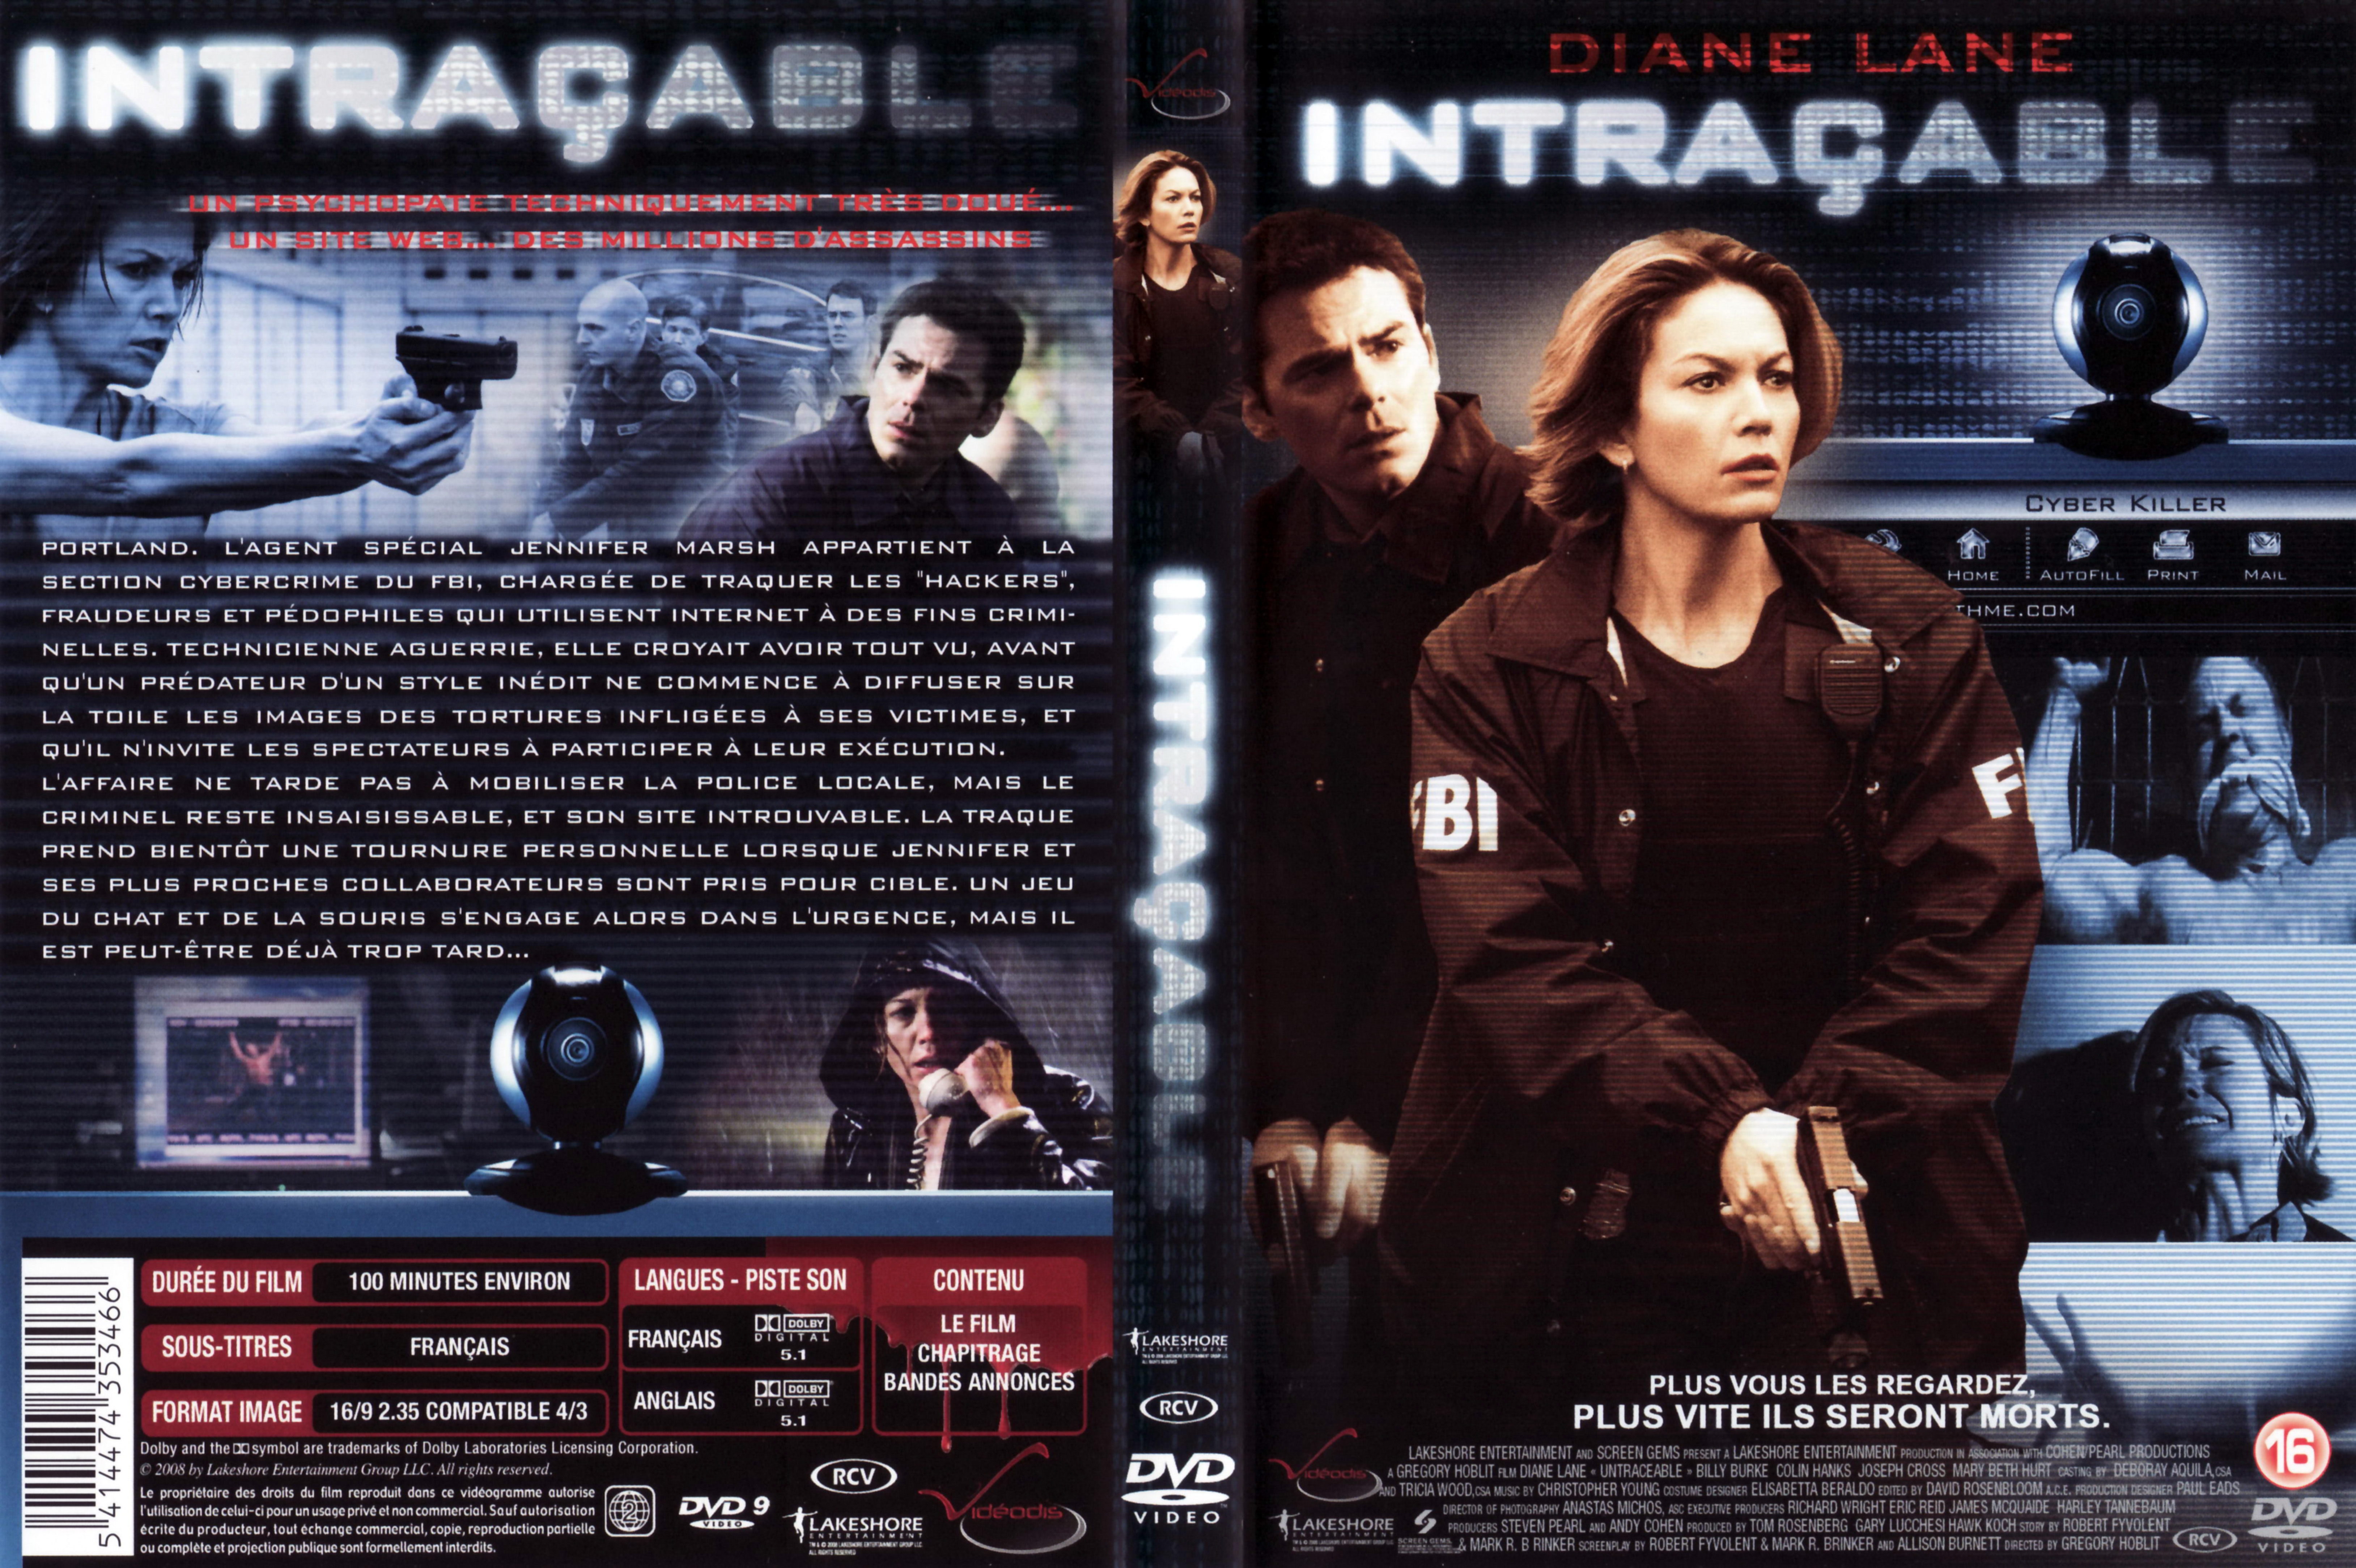 Jaquette DVD Intracable v2